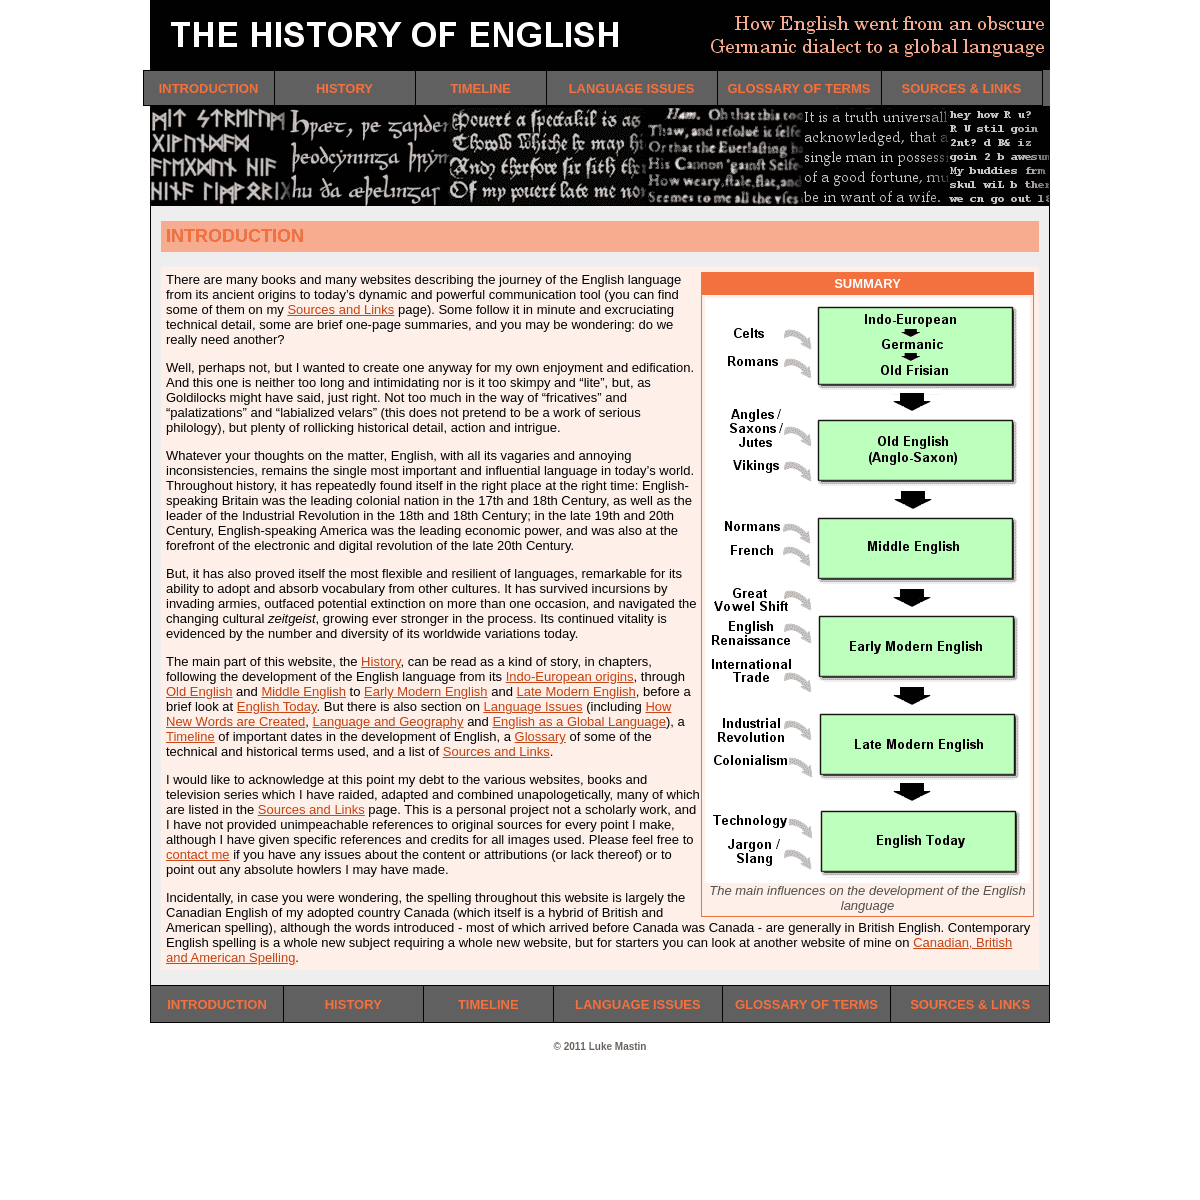 A complete backup of https://thehistoryofenglish.com